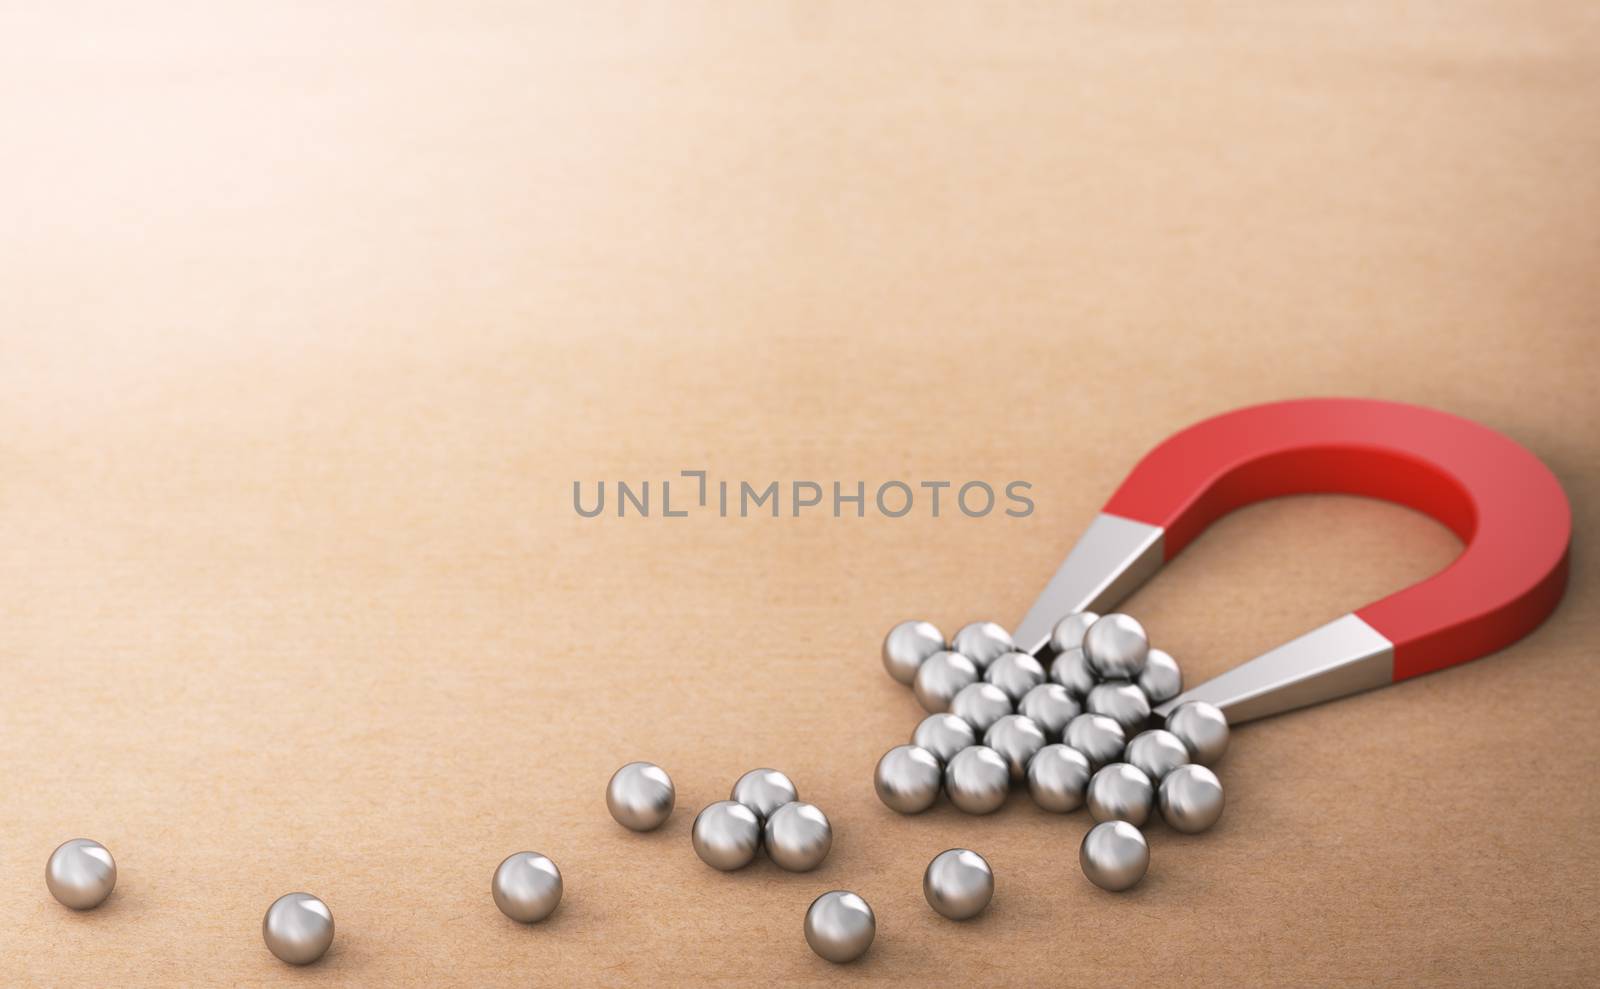 Lead Magnet over paper background attracting and retaining many spheres, symbol of new customers. B2B inbound marketing concept. 3D illustration